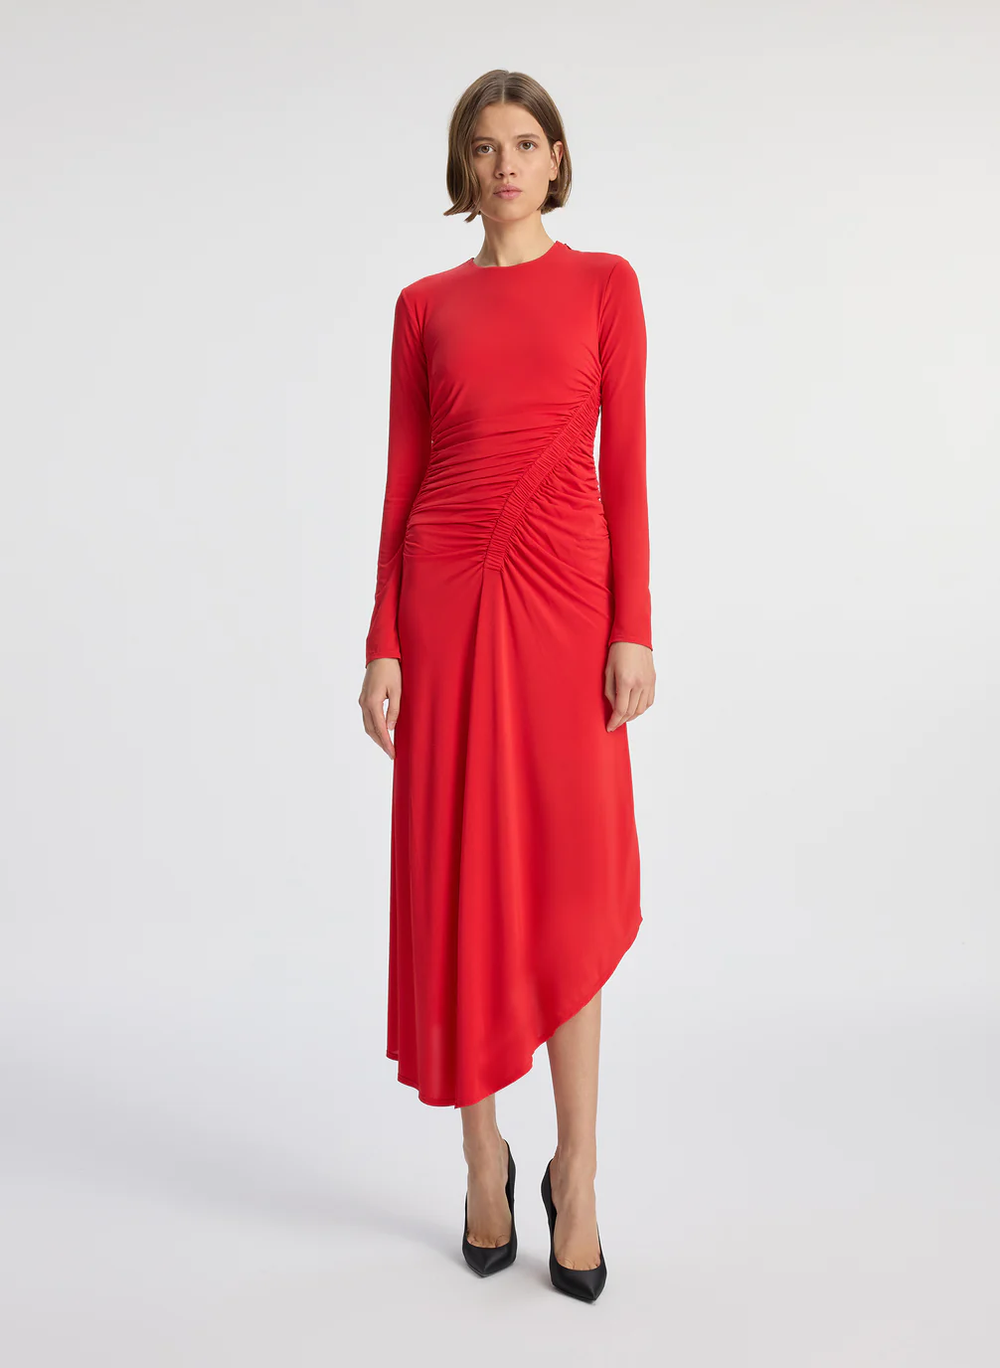 ADELINE_DRESS_RBY_0016_1006x.png